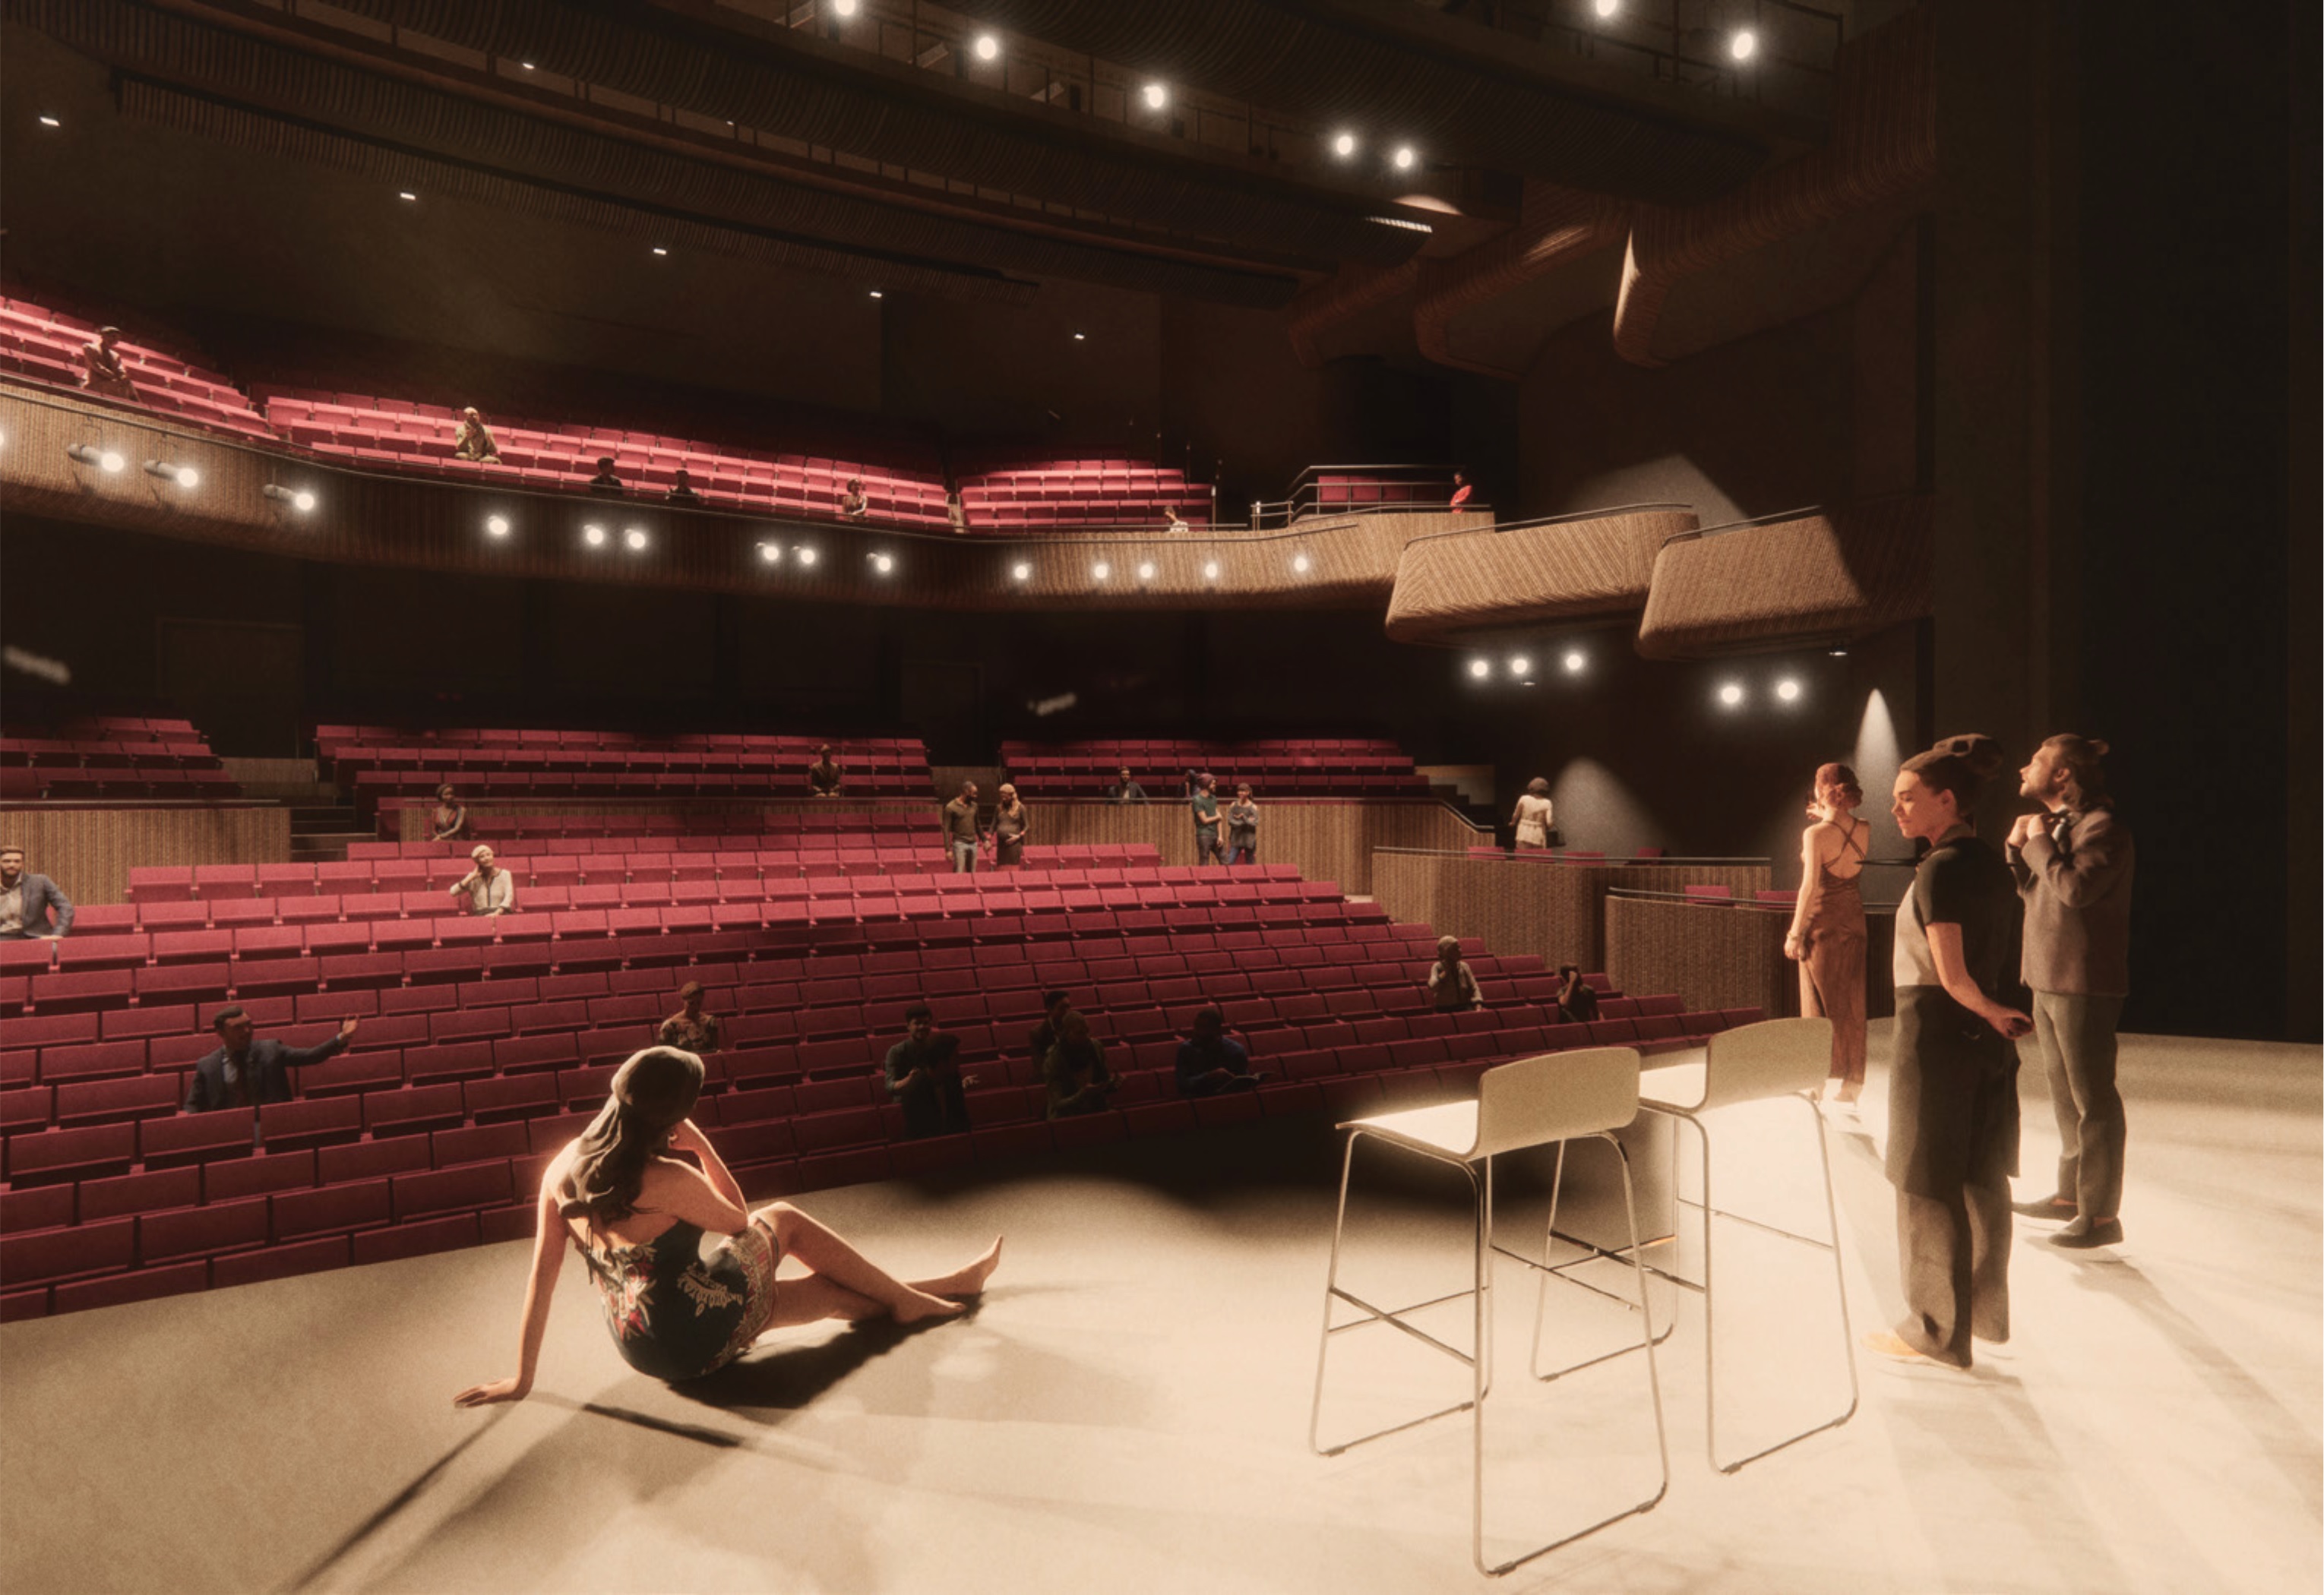 An artists impression of the auditorium from the stage.